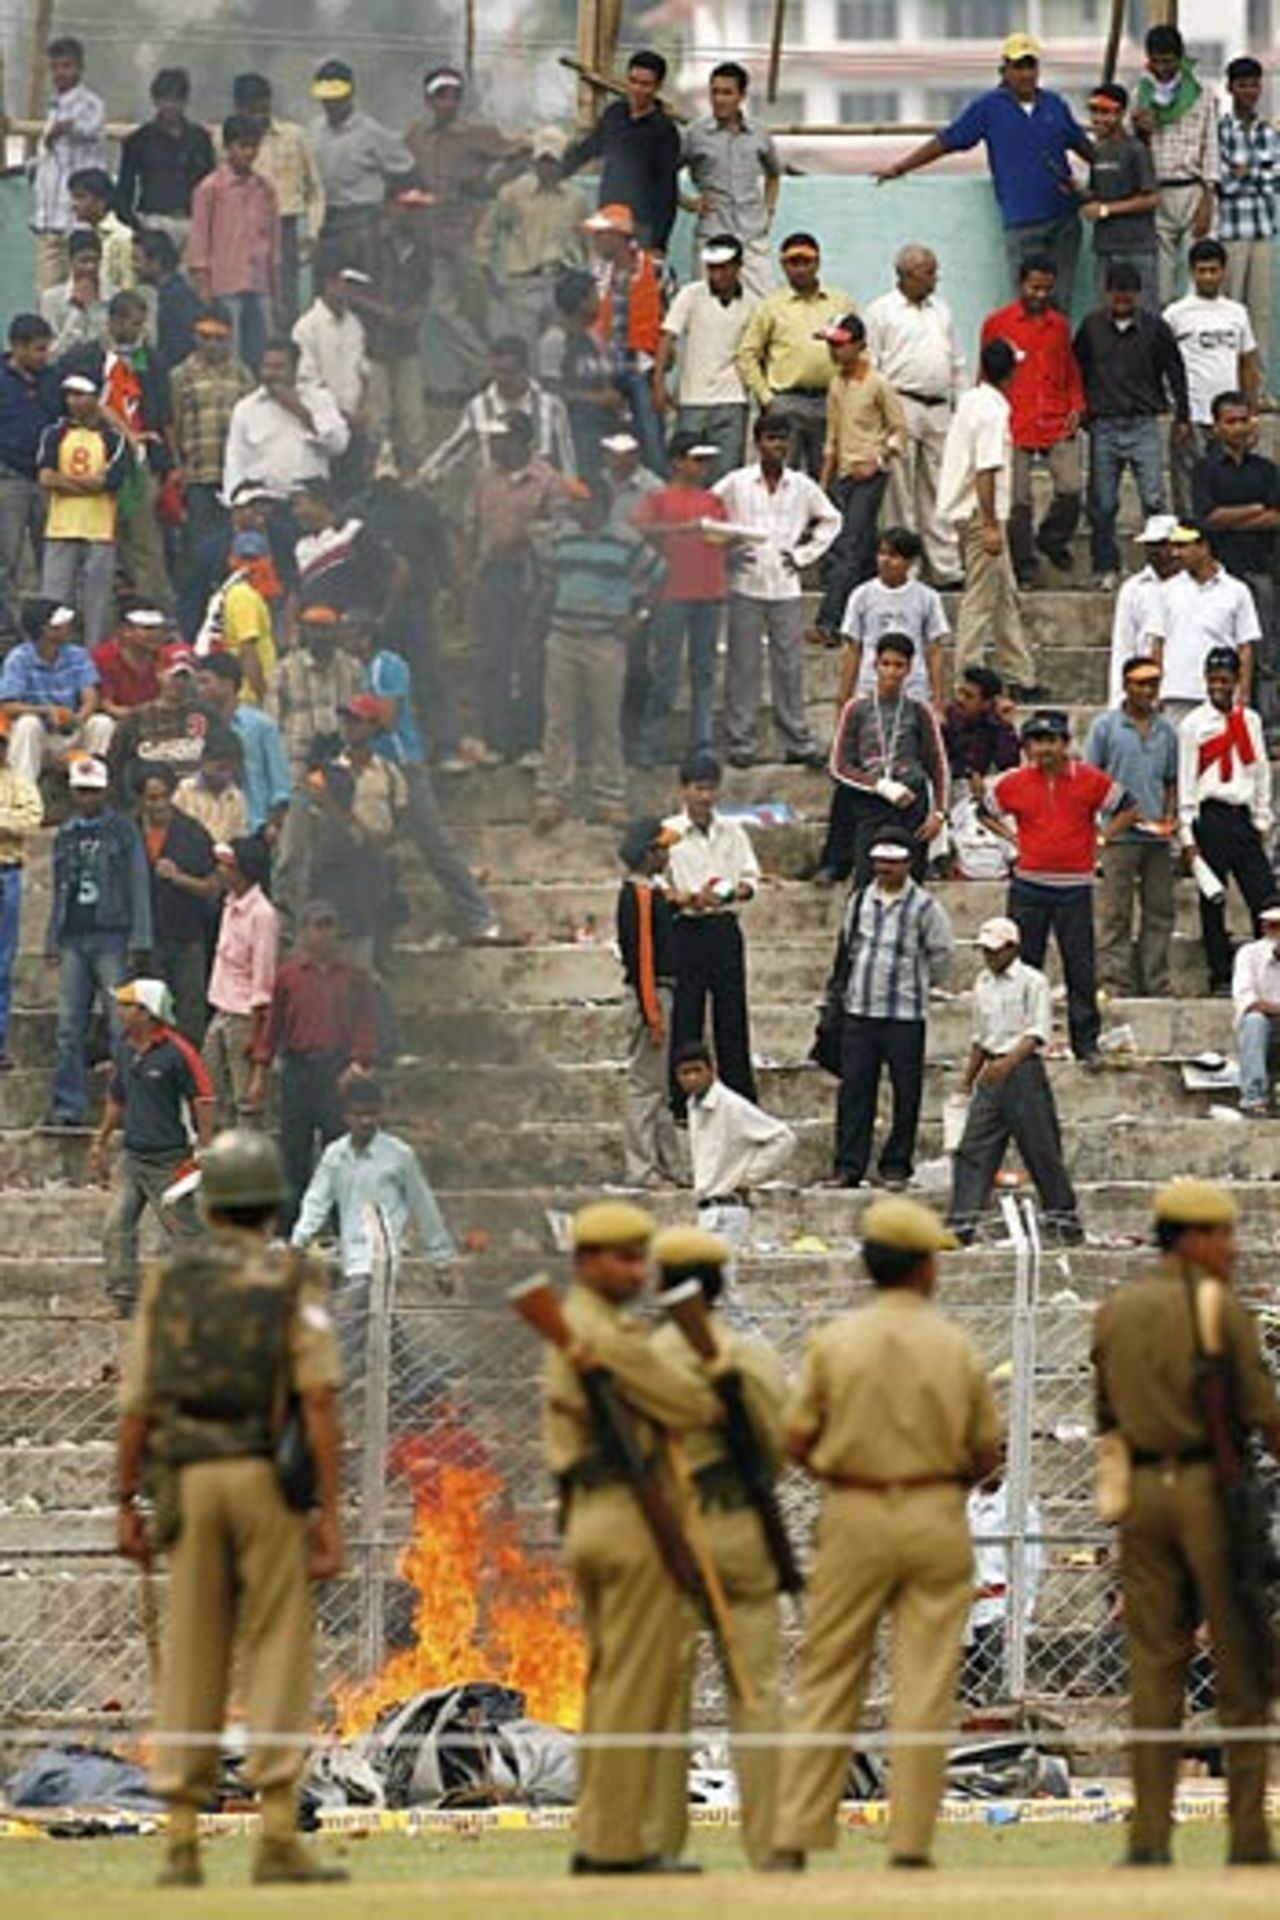 Violent scenes broke out as the crowd's anger grew after the game was abandoned, India v England, 5th ODI, Guwahati,  April 9, 2006